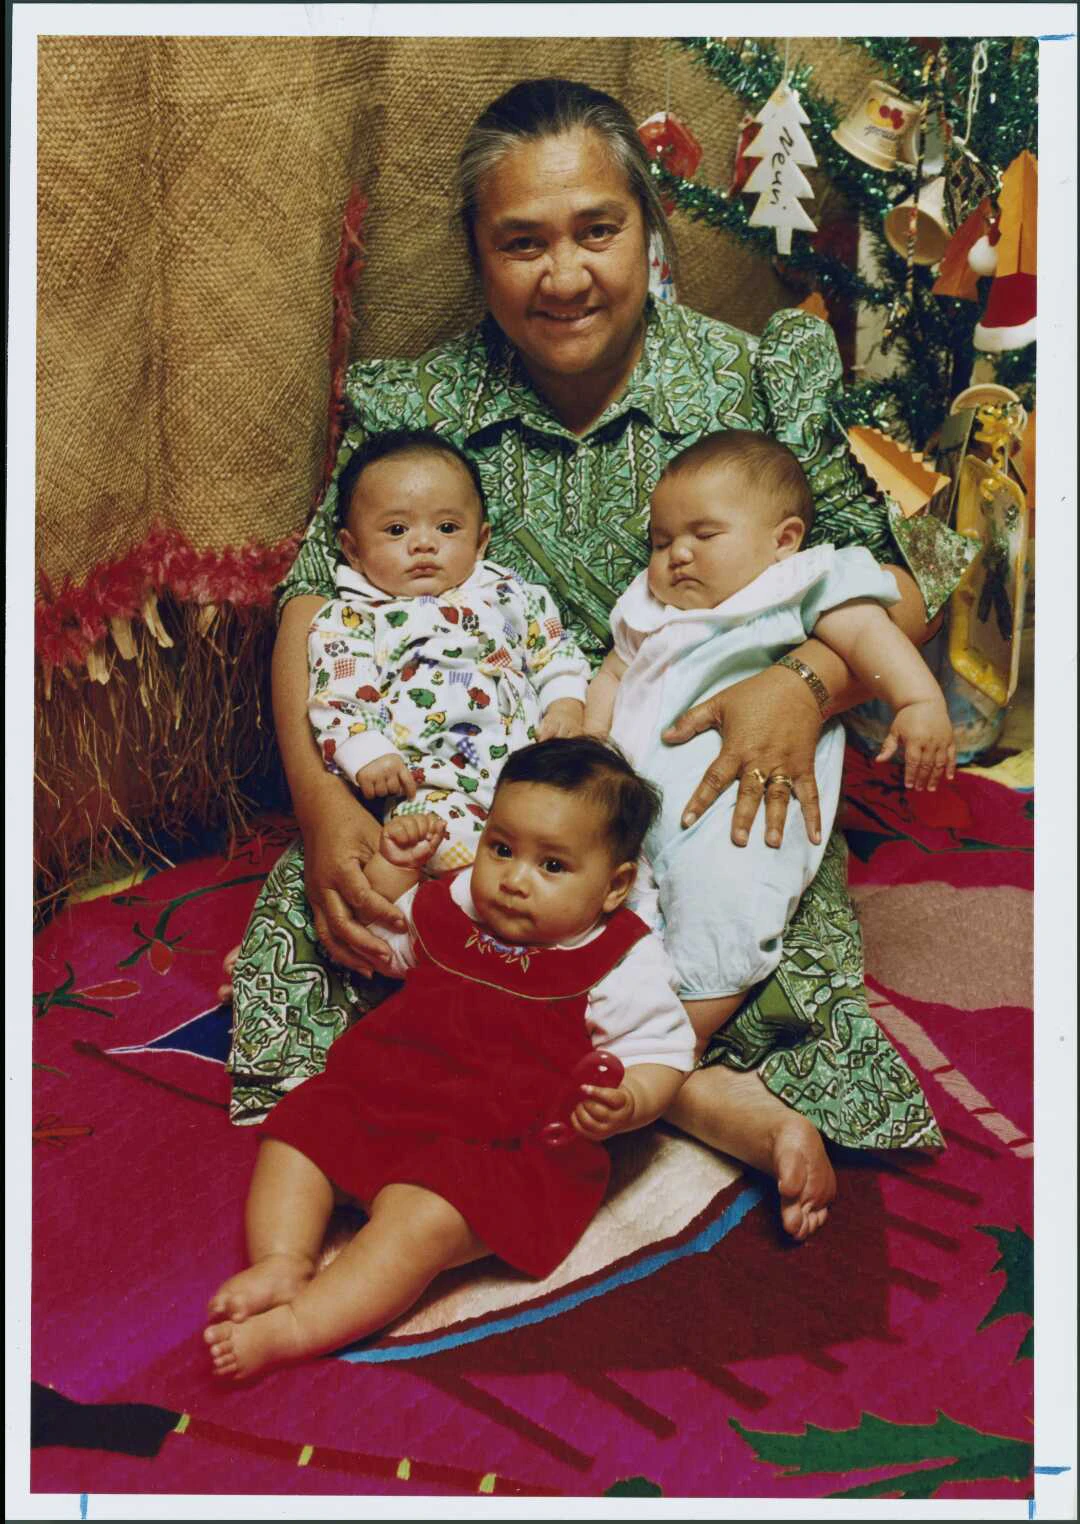 Samoan woman setting on a colourful mat with three babies. 